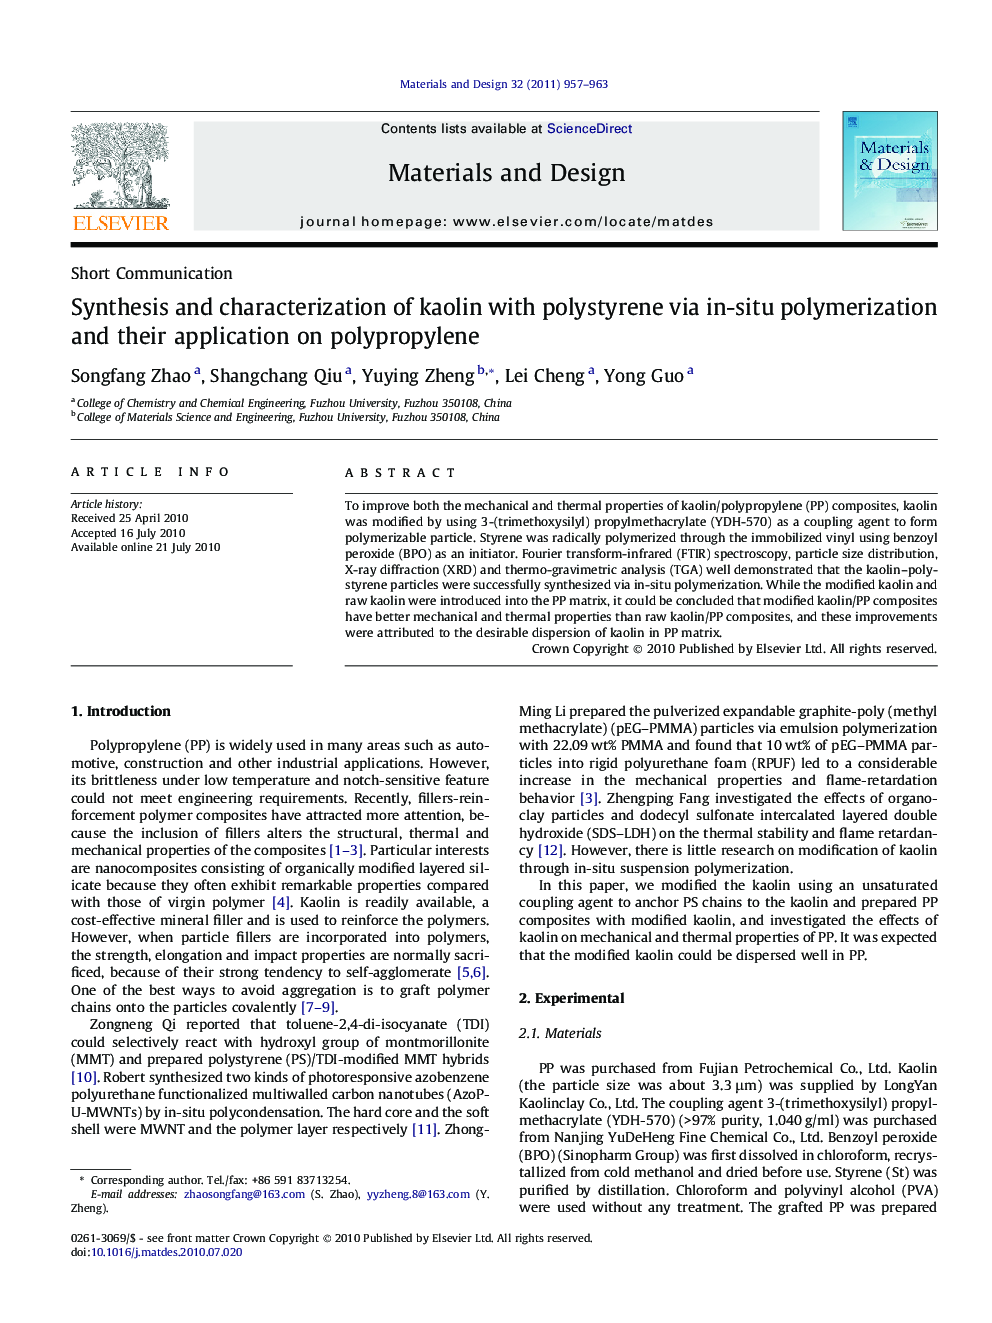 Synthesis and characterization of kaolin with polystyrene via in-situ polymerization and their application on polypropylene